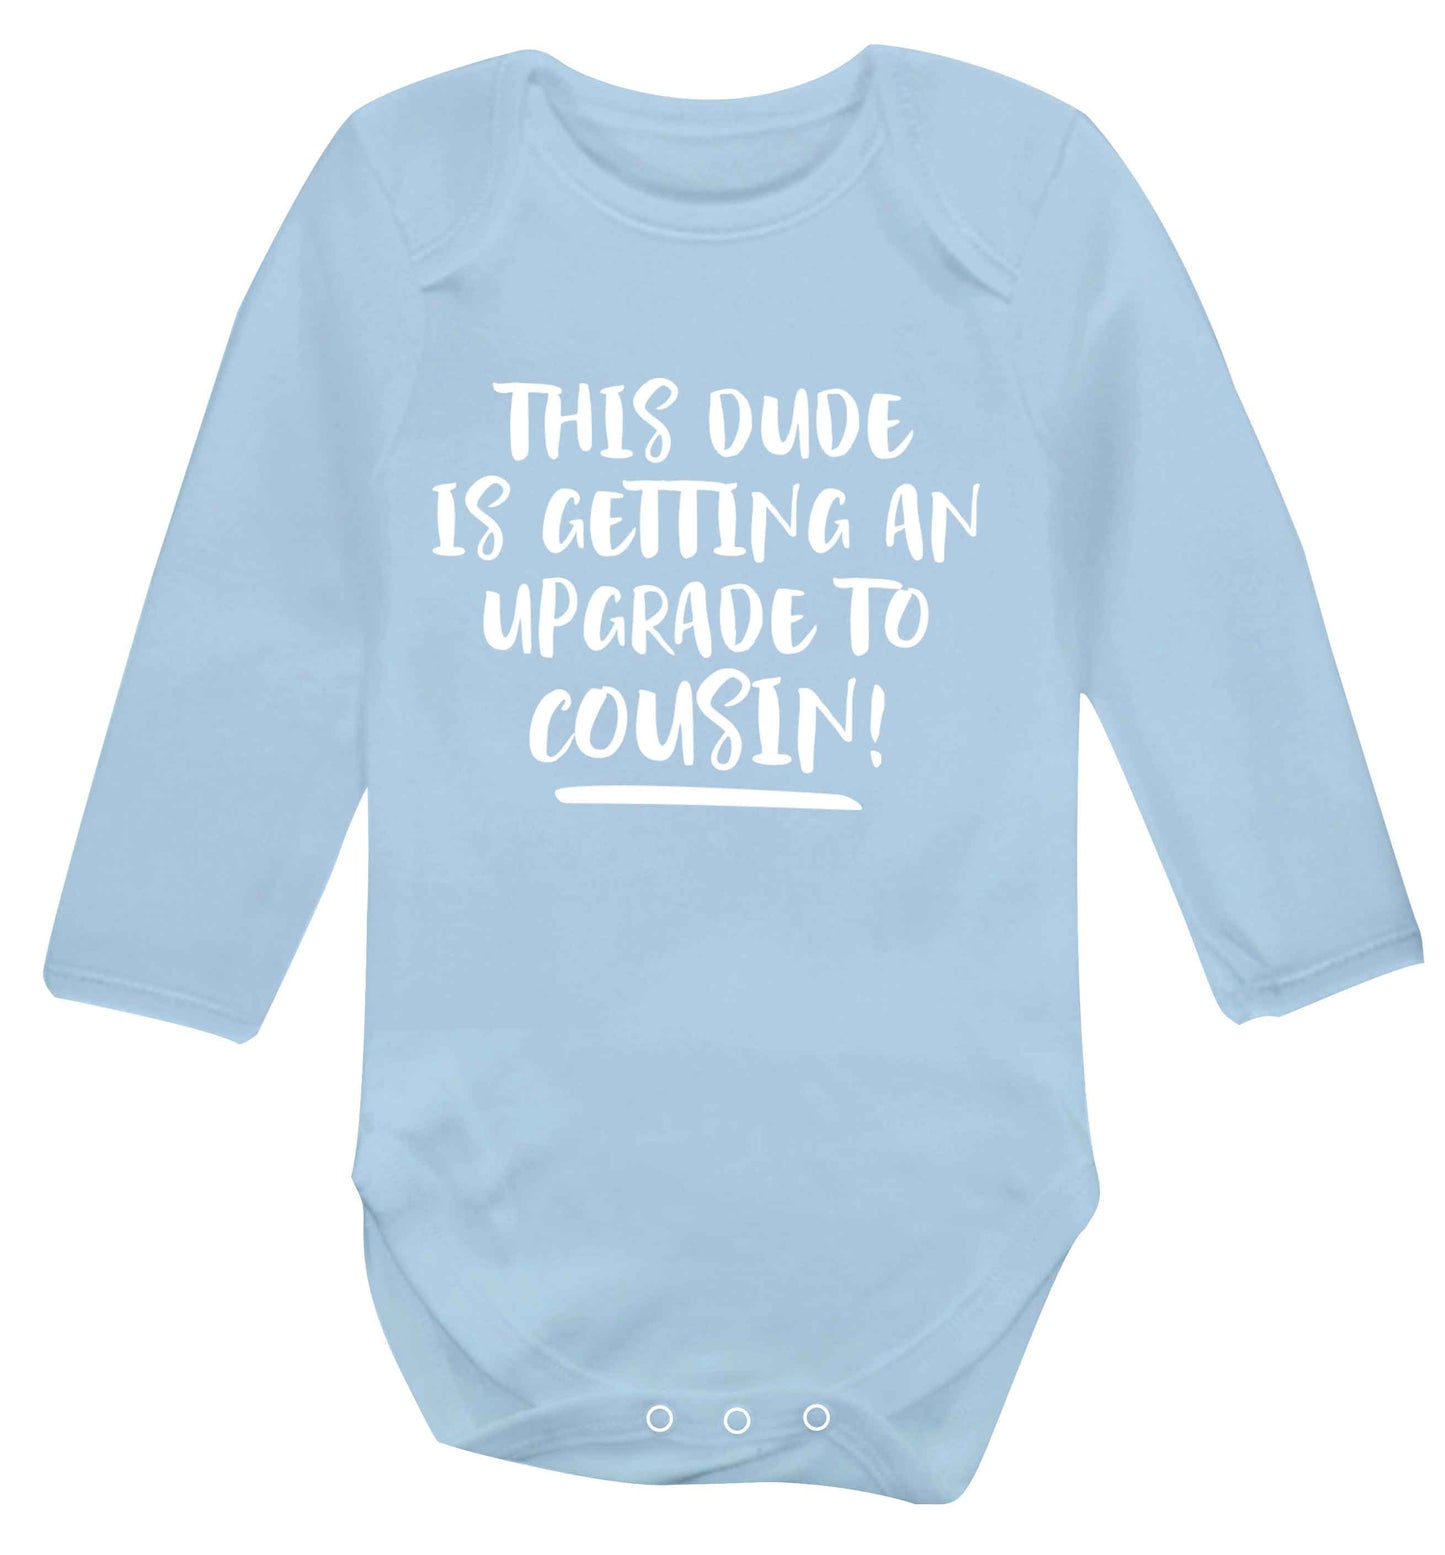 This dude is getting an upgrade to cousin! Baby Vest long sleeved pale blue 6-12 months